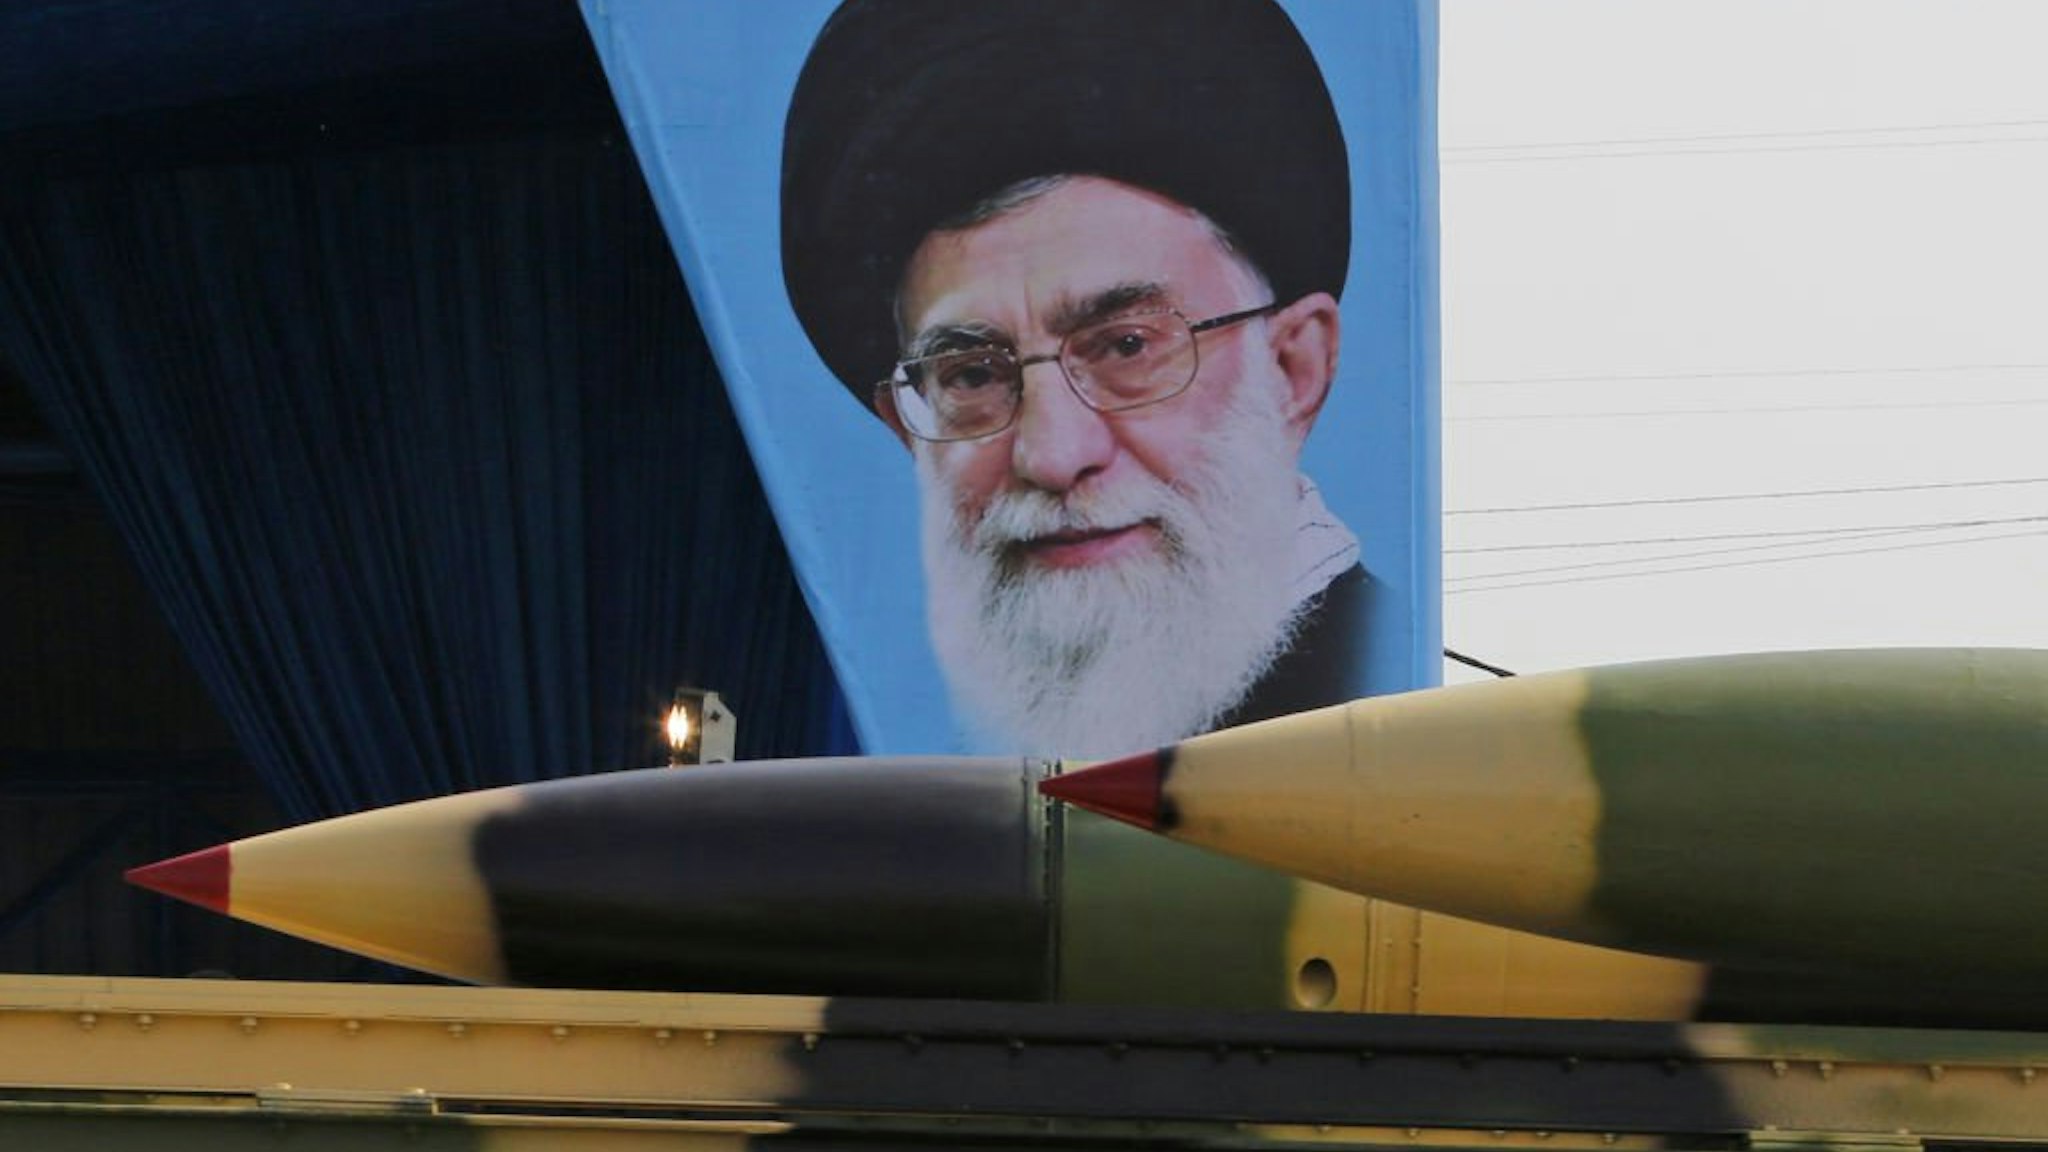 Rouhani's photo set behind image of weapons in Iran